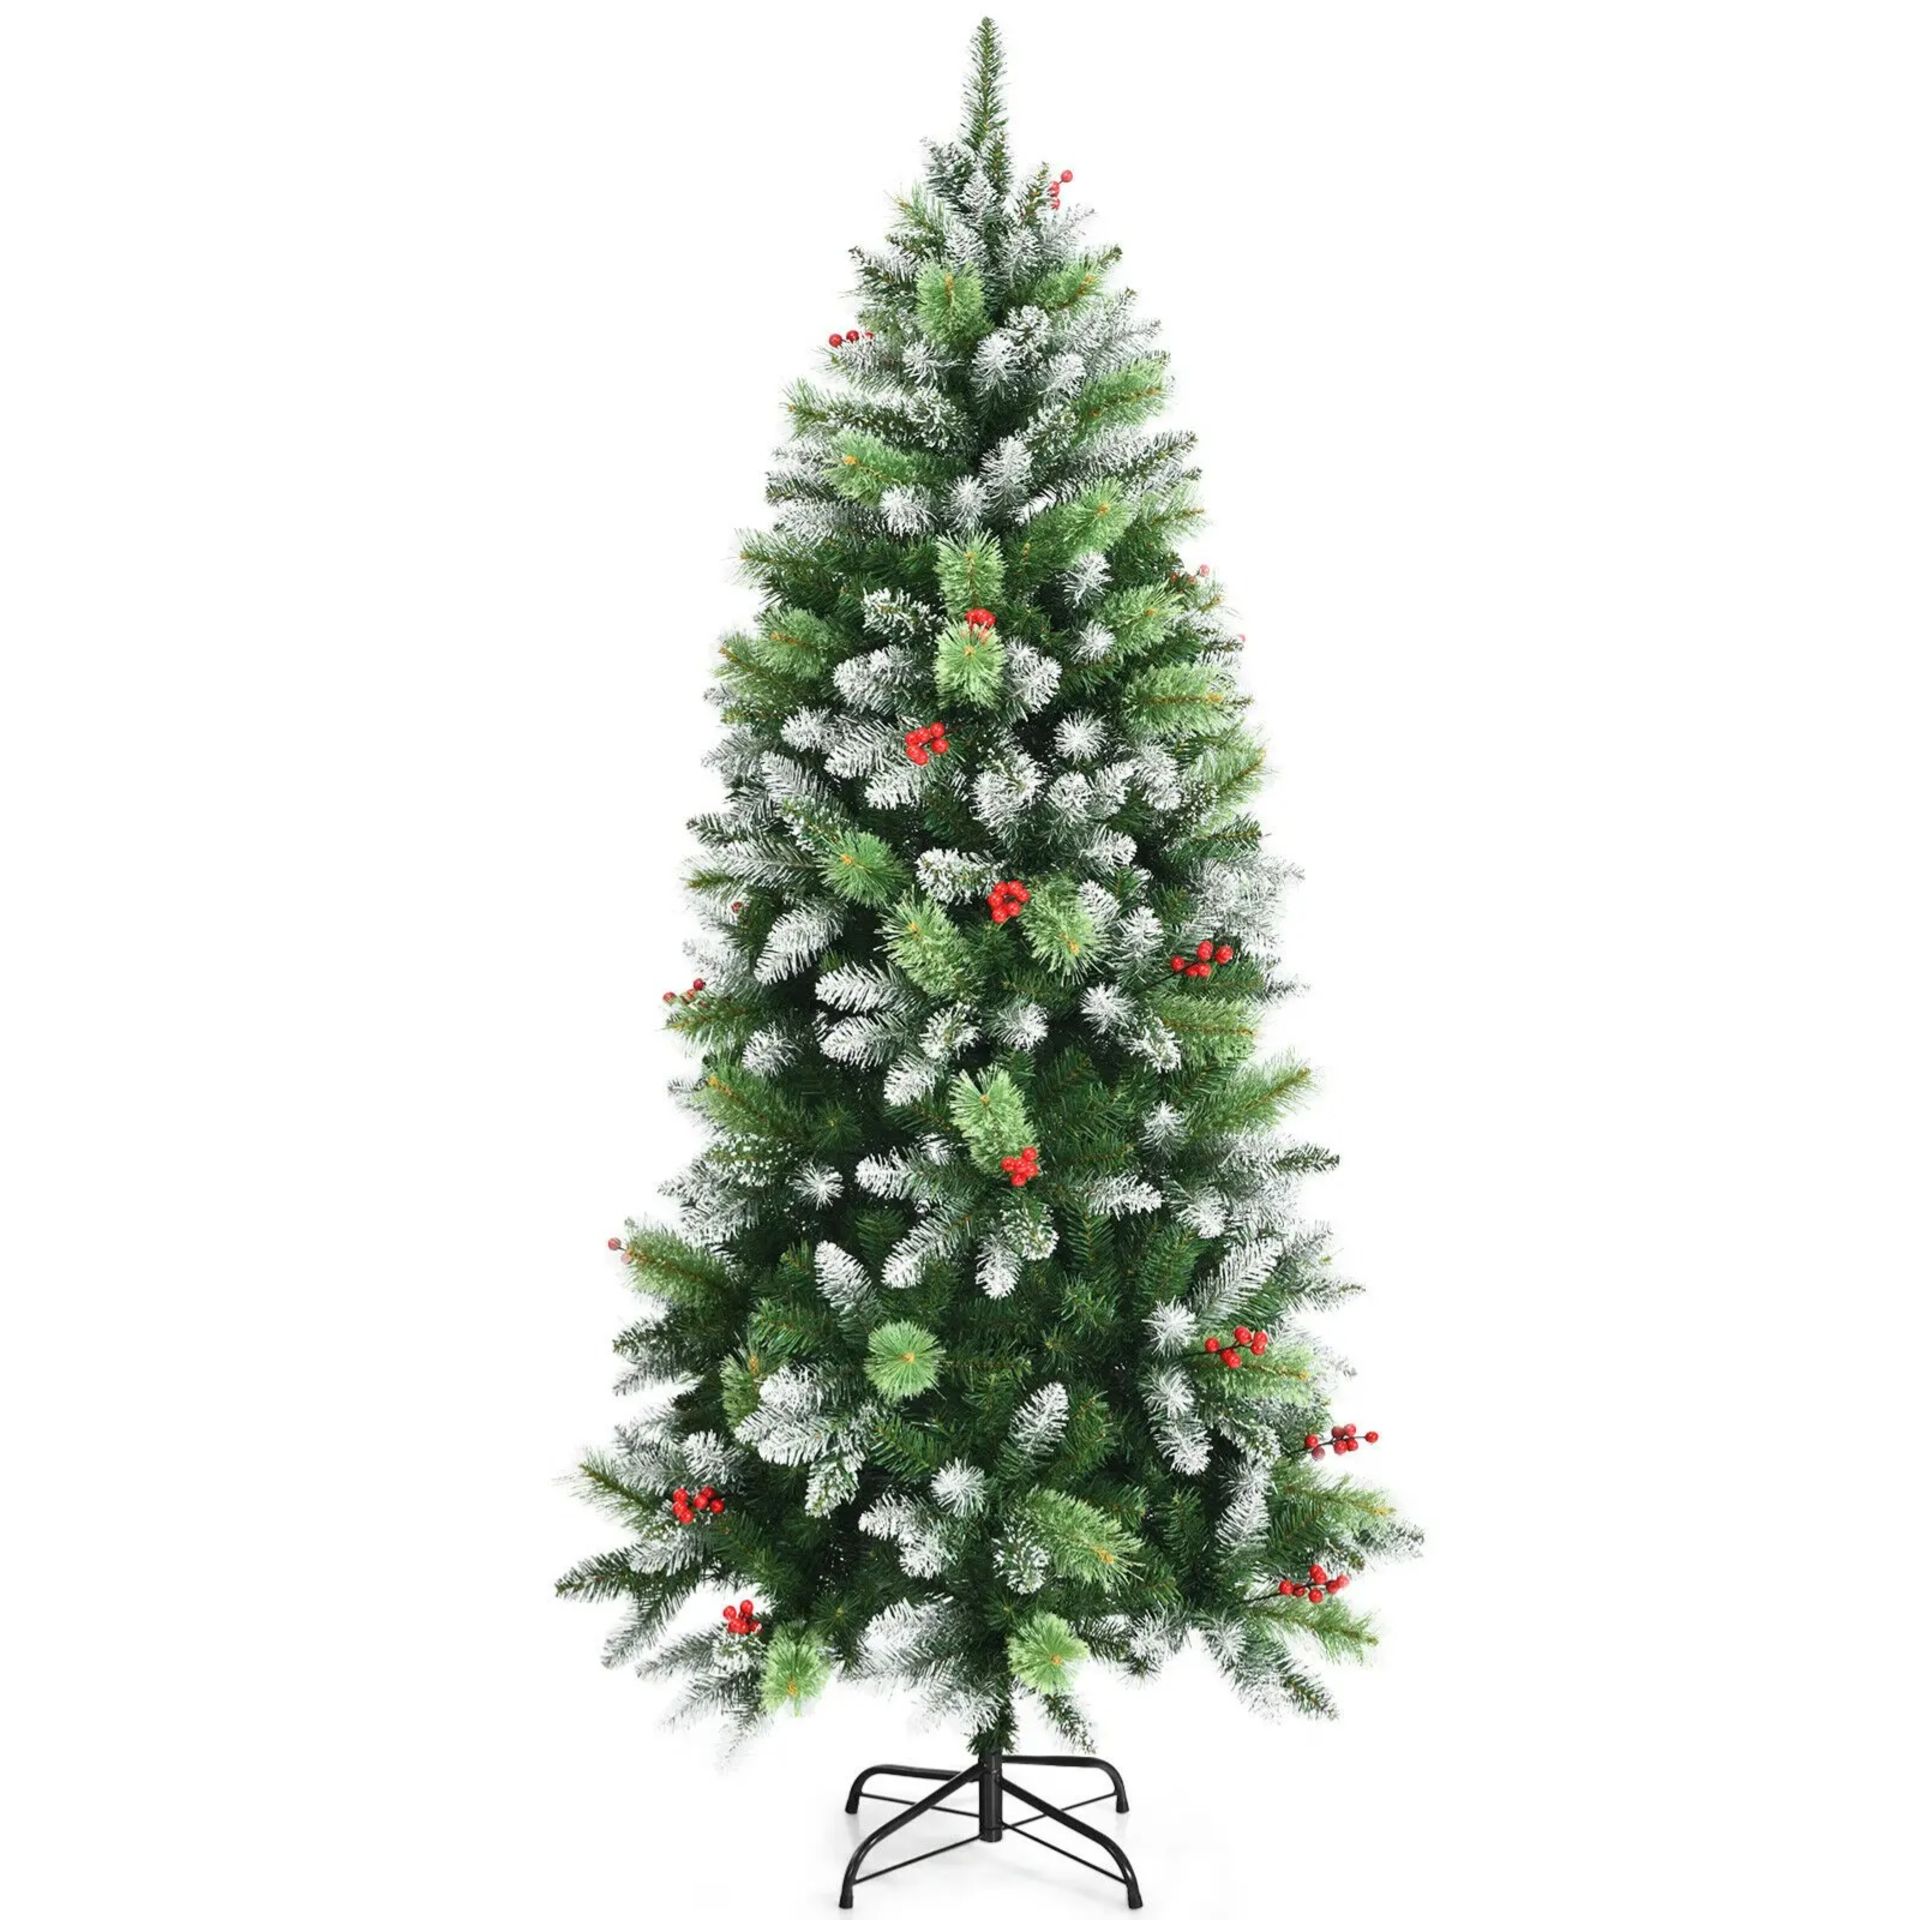 5ft Unlit Snowy Hinged Artificial Christmas Pencil Tree w/ Red Berries - ER54